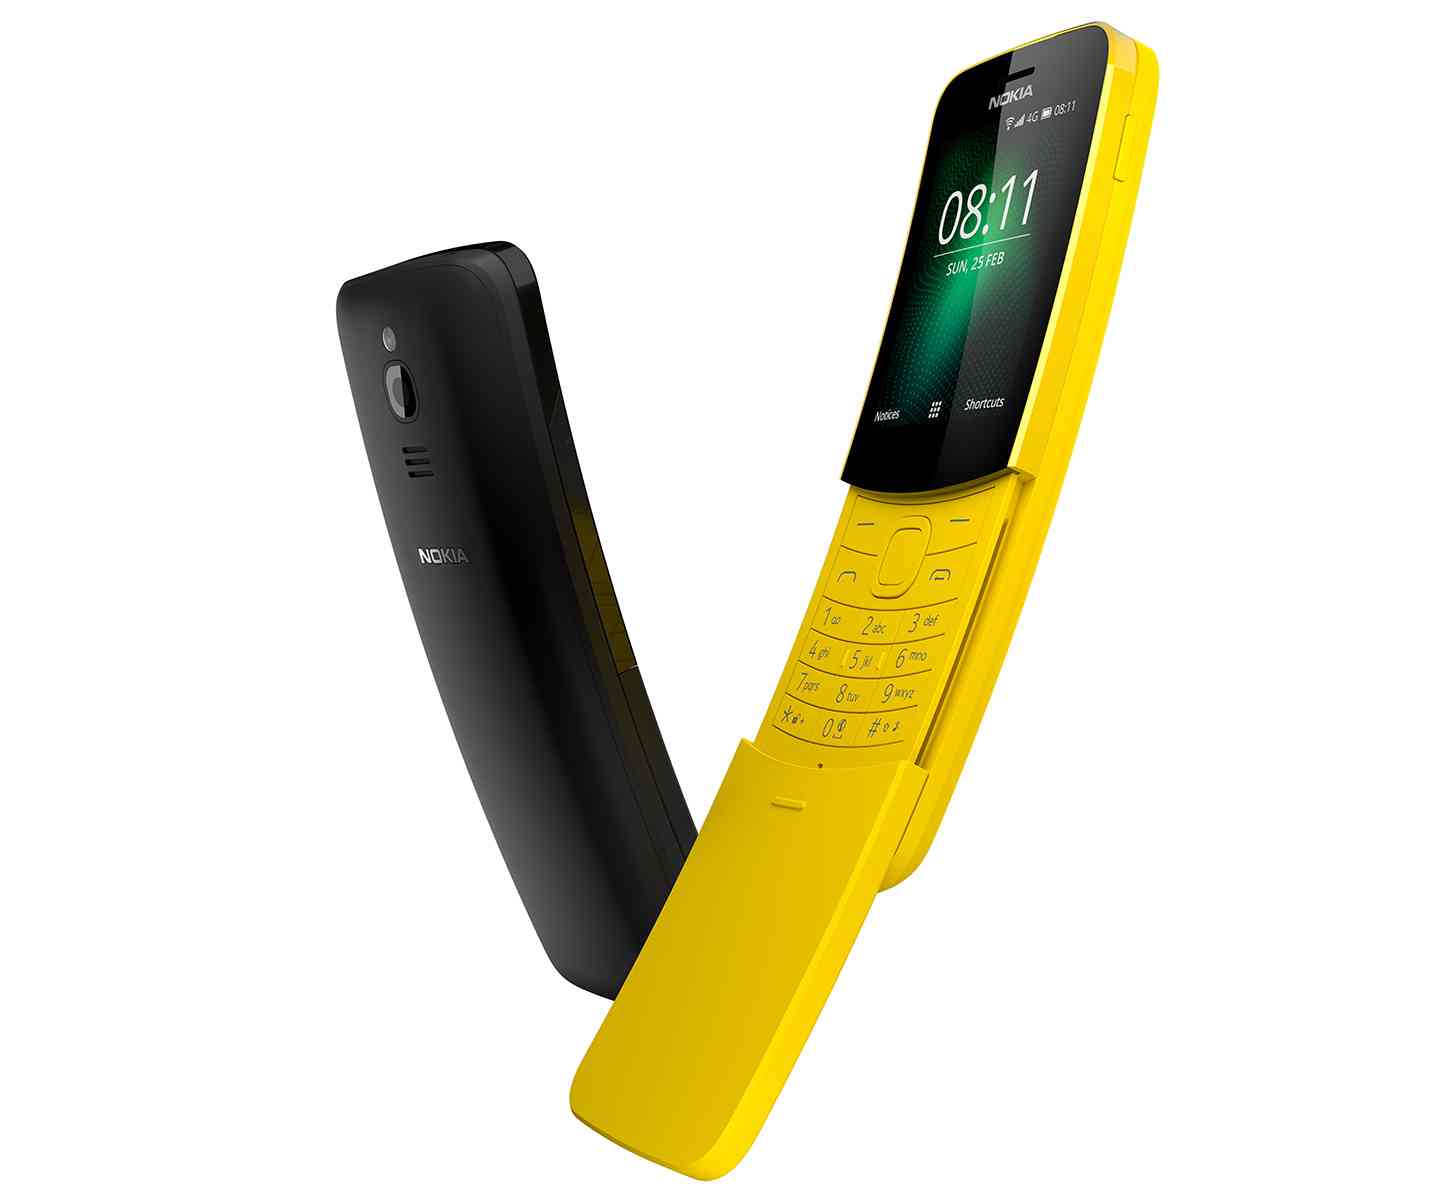 Nokia 8110 official images